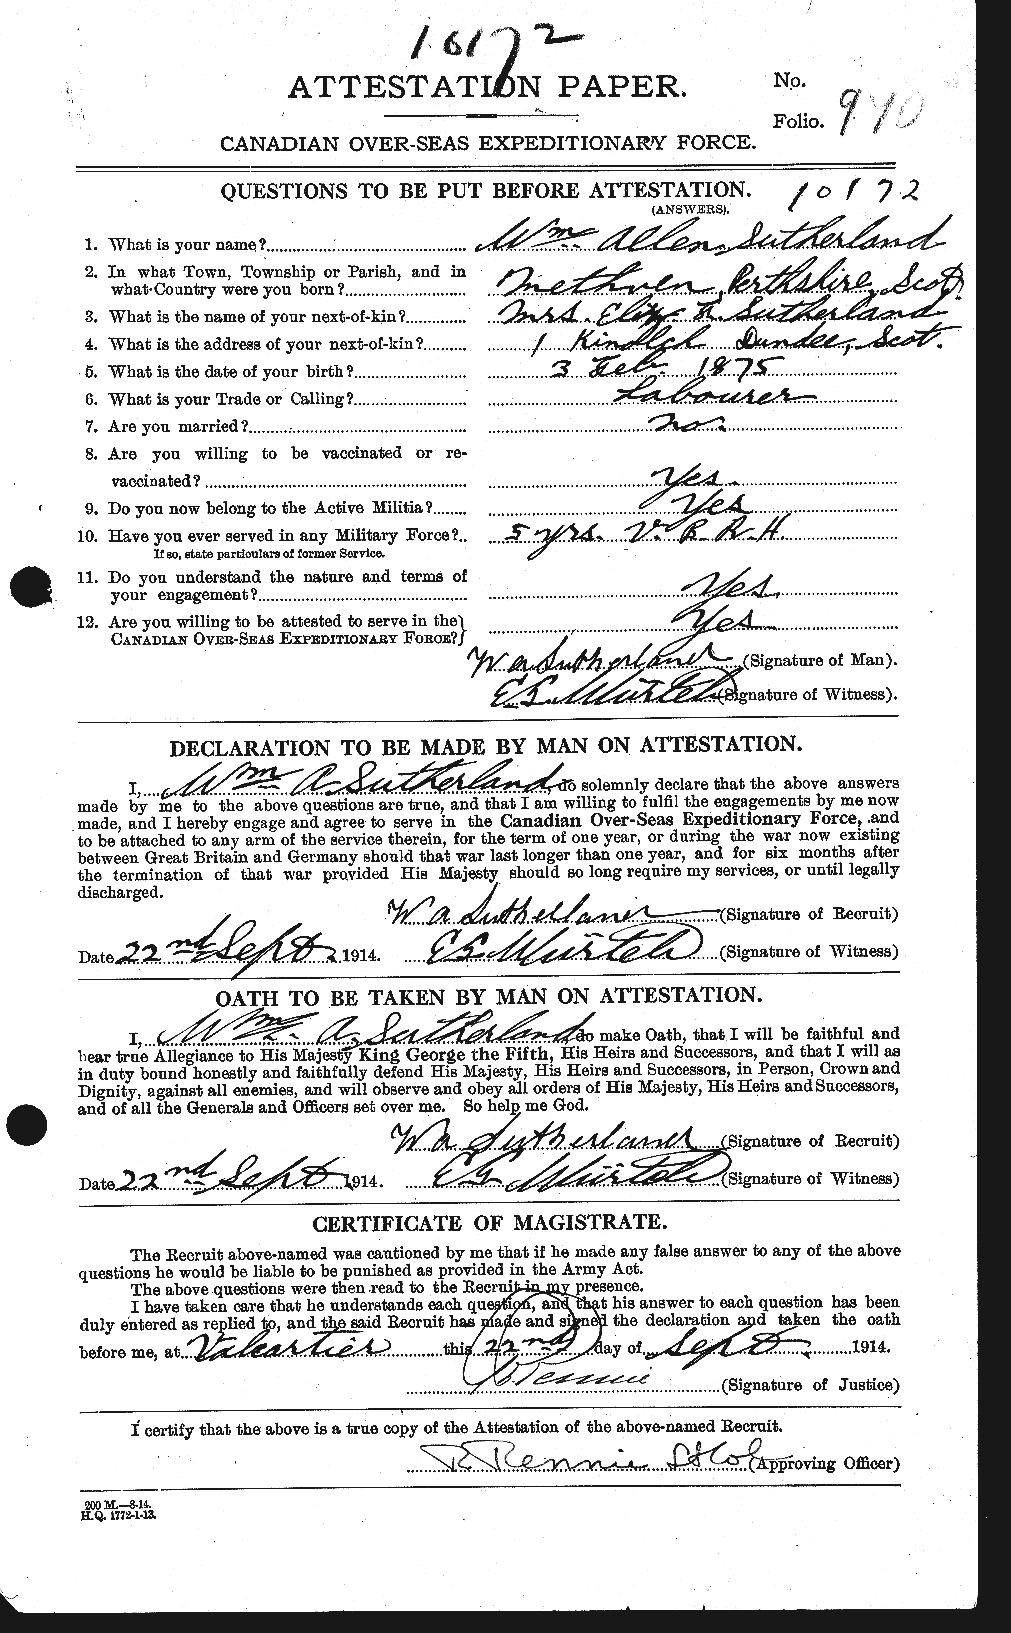 Personnel Records of the First World War - CEF 126447a